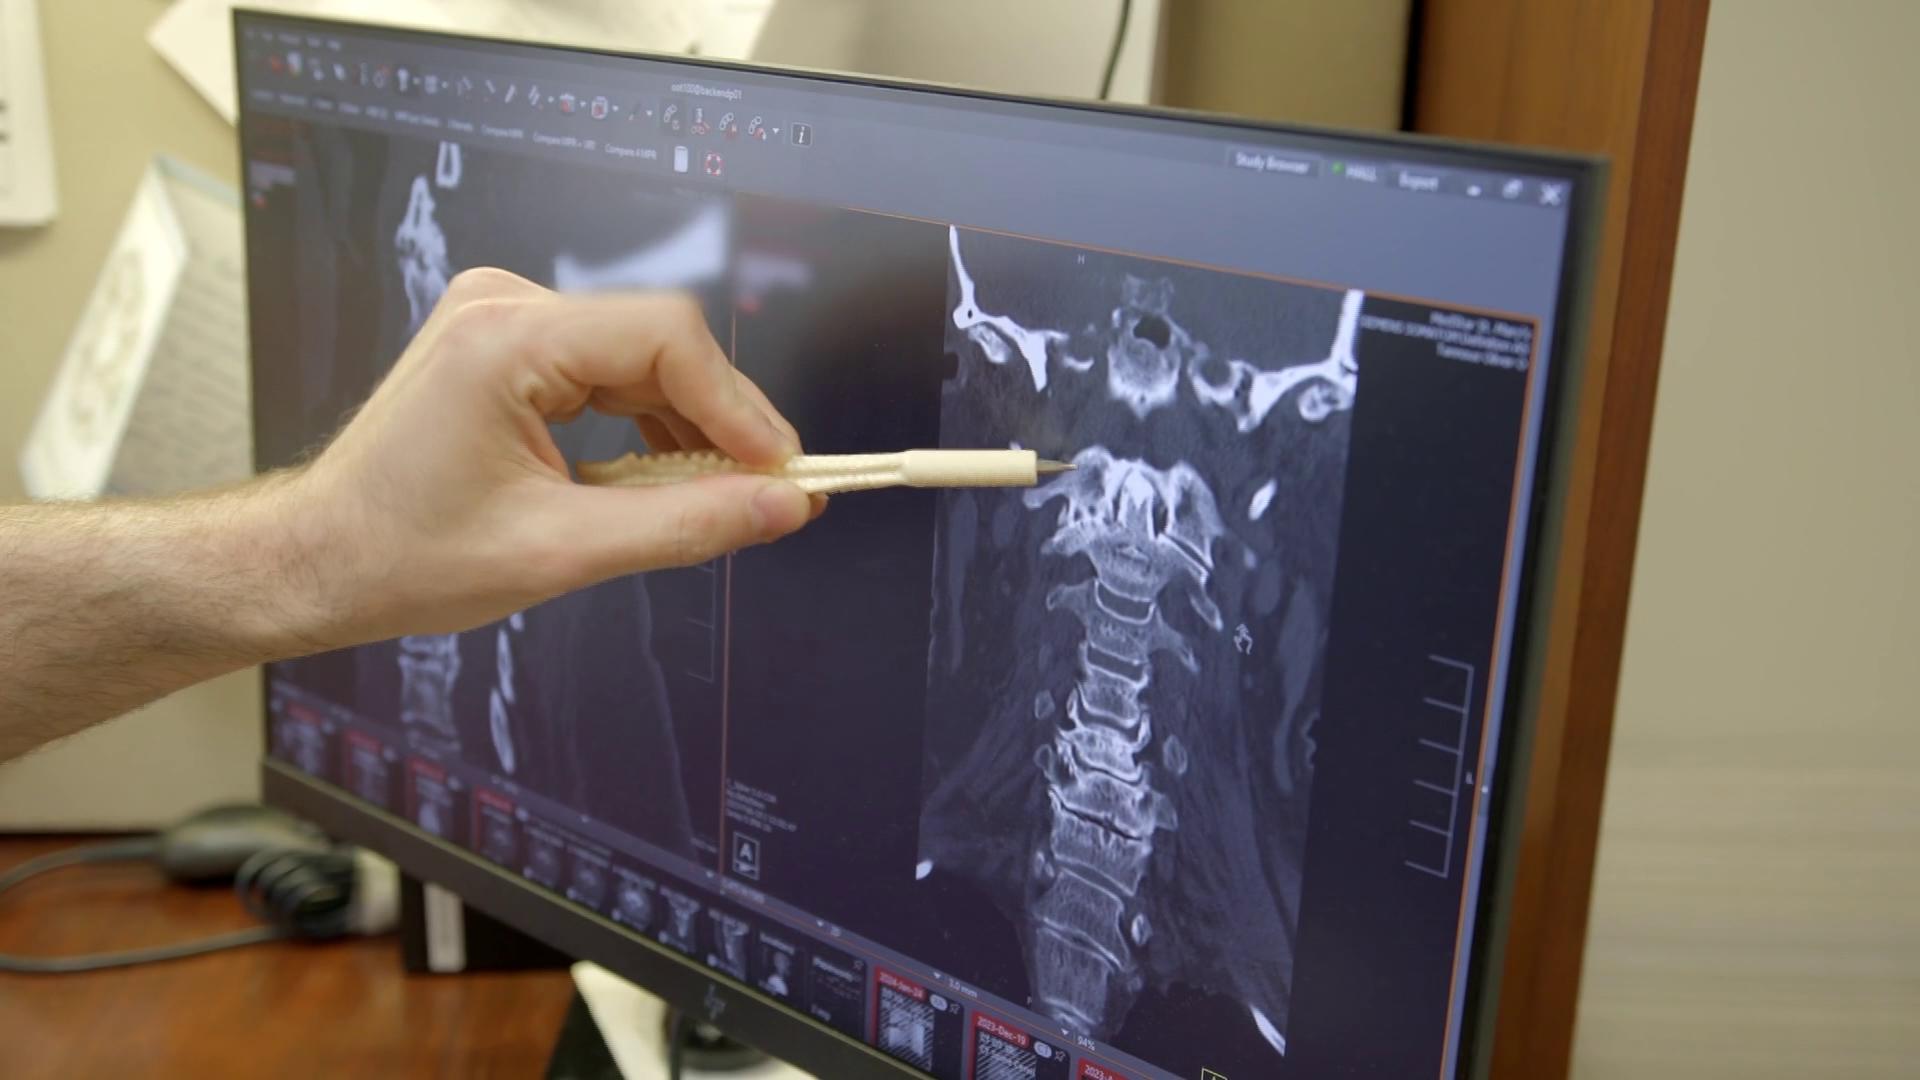 Revolutionary new technology transforms treatment for upper spine issues